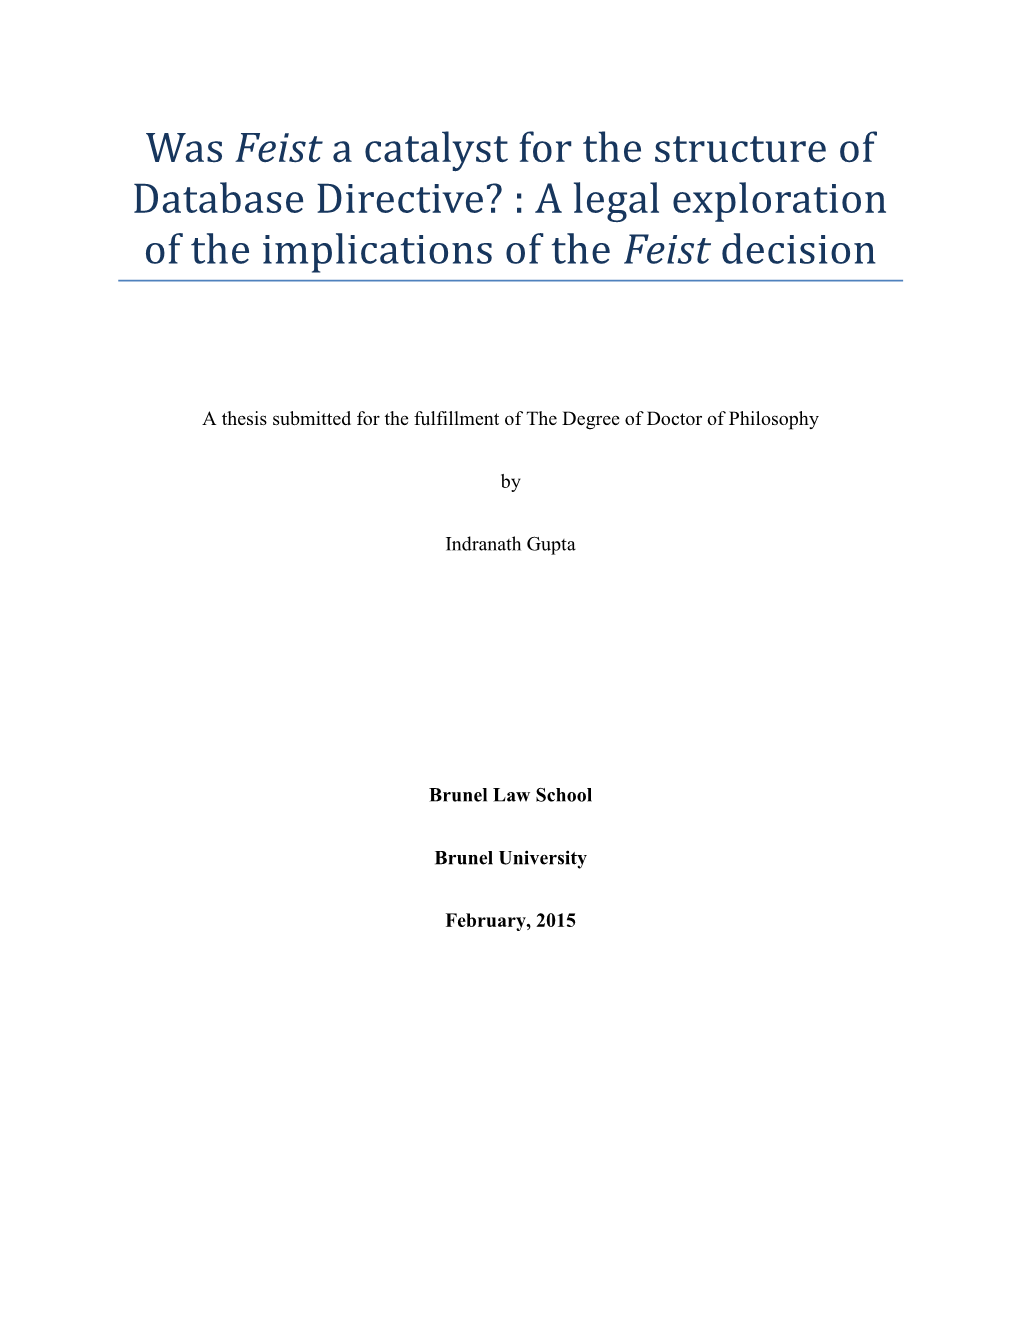 Was Feist a Catalyst for the Structure of Database Directive? : a Legal Exploration of the Implications of the Feist Decision